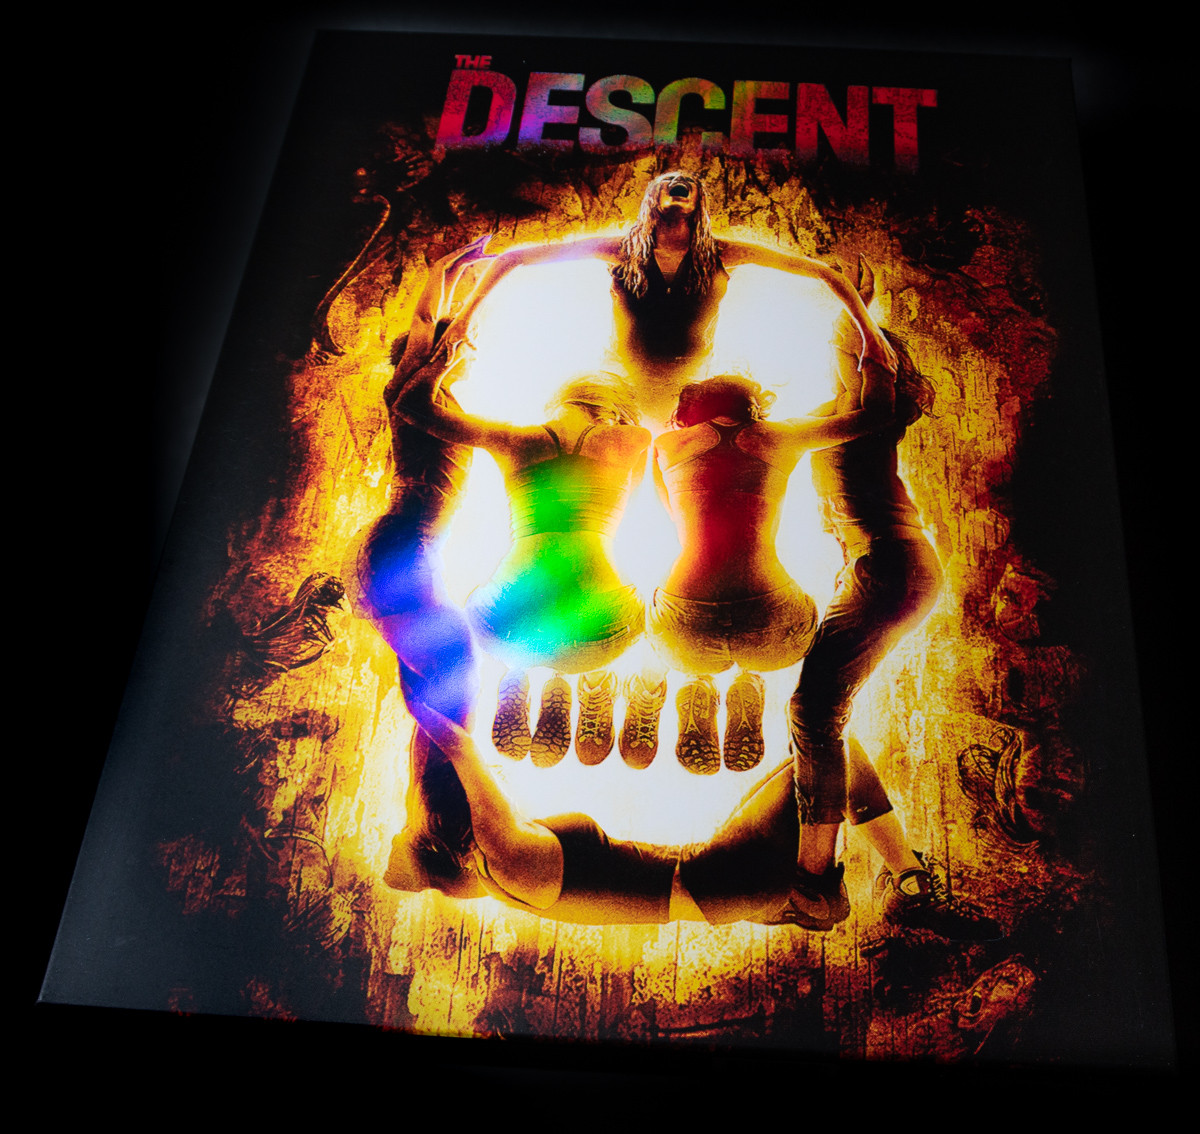 TheDescent01.jpg